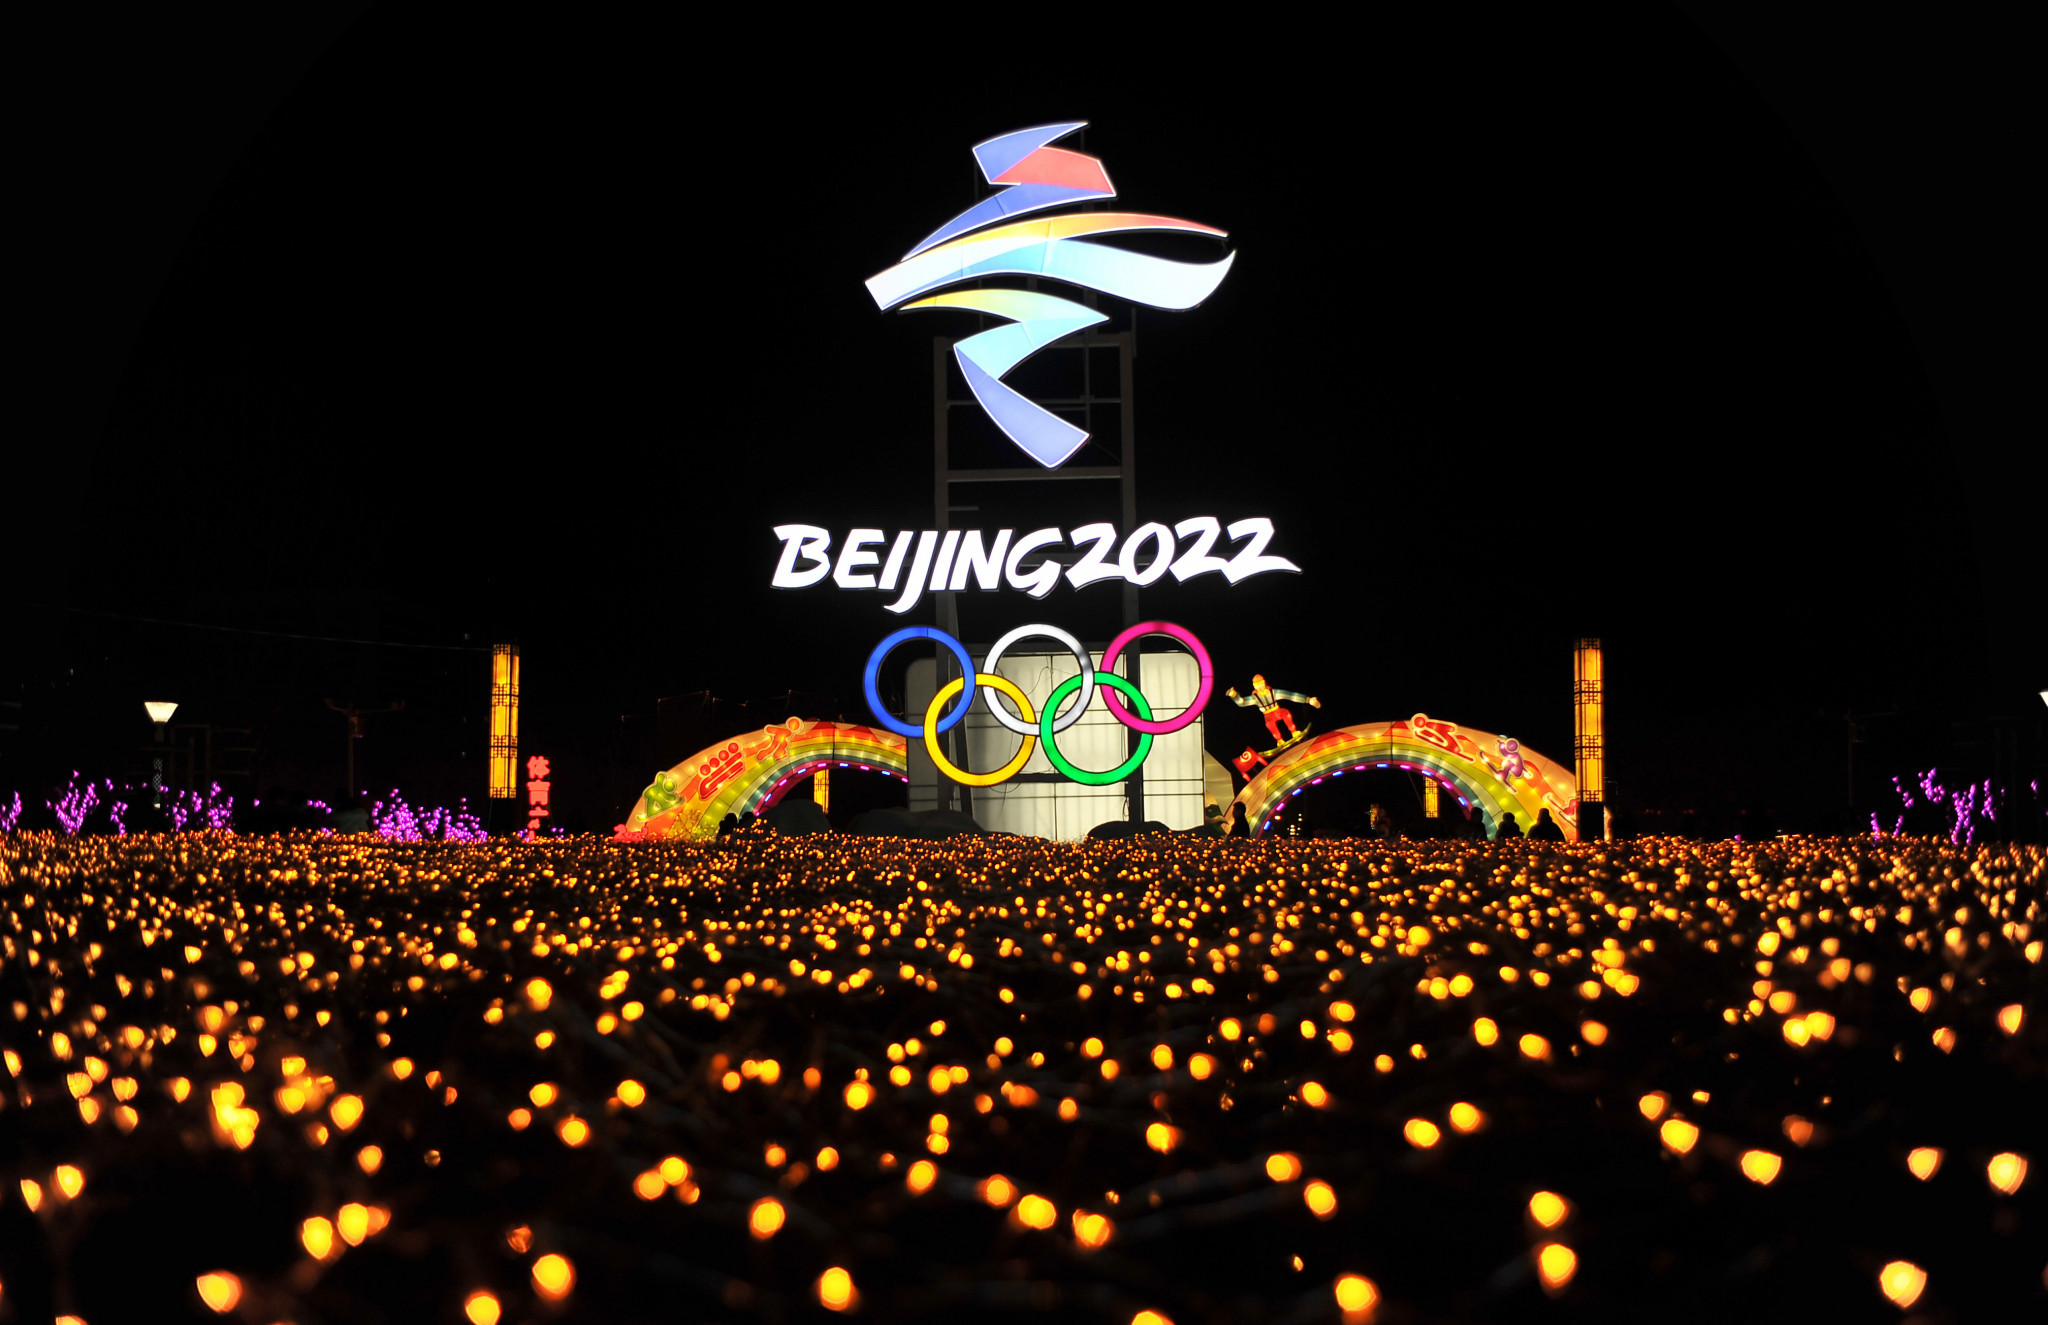 First Executive Learning Pathway held for Beijing 2022 Winter Olympic and Paralympic Games